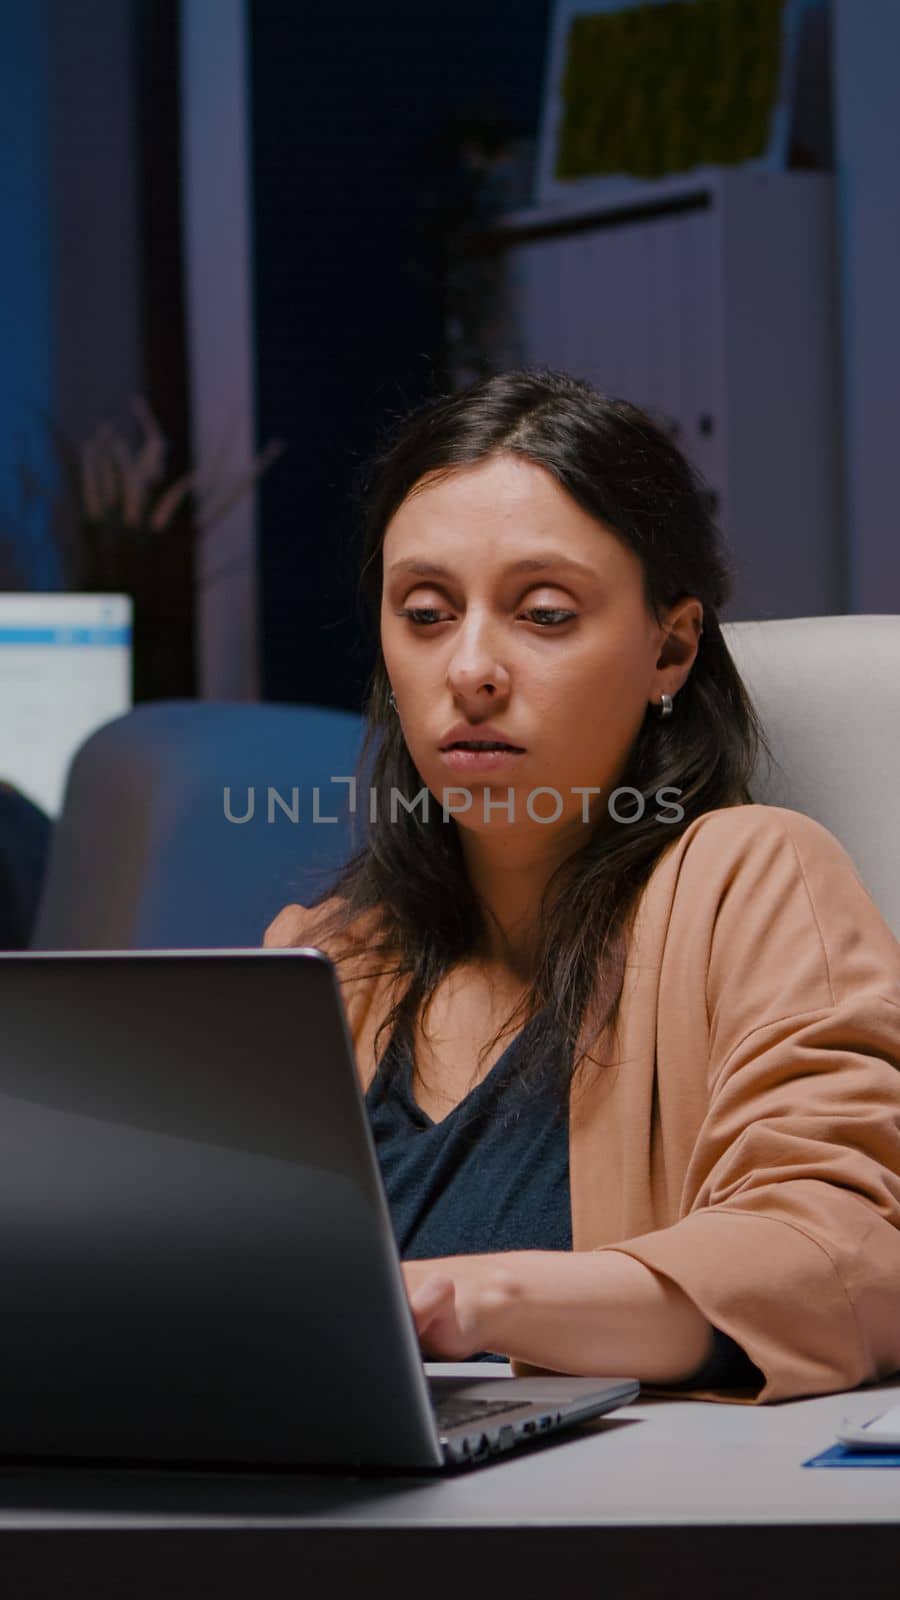 Workaholic entrepreneur woman sitting at desk table analysing financial graphics by DCStudio